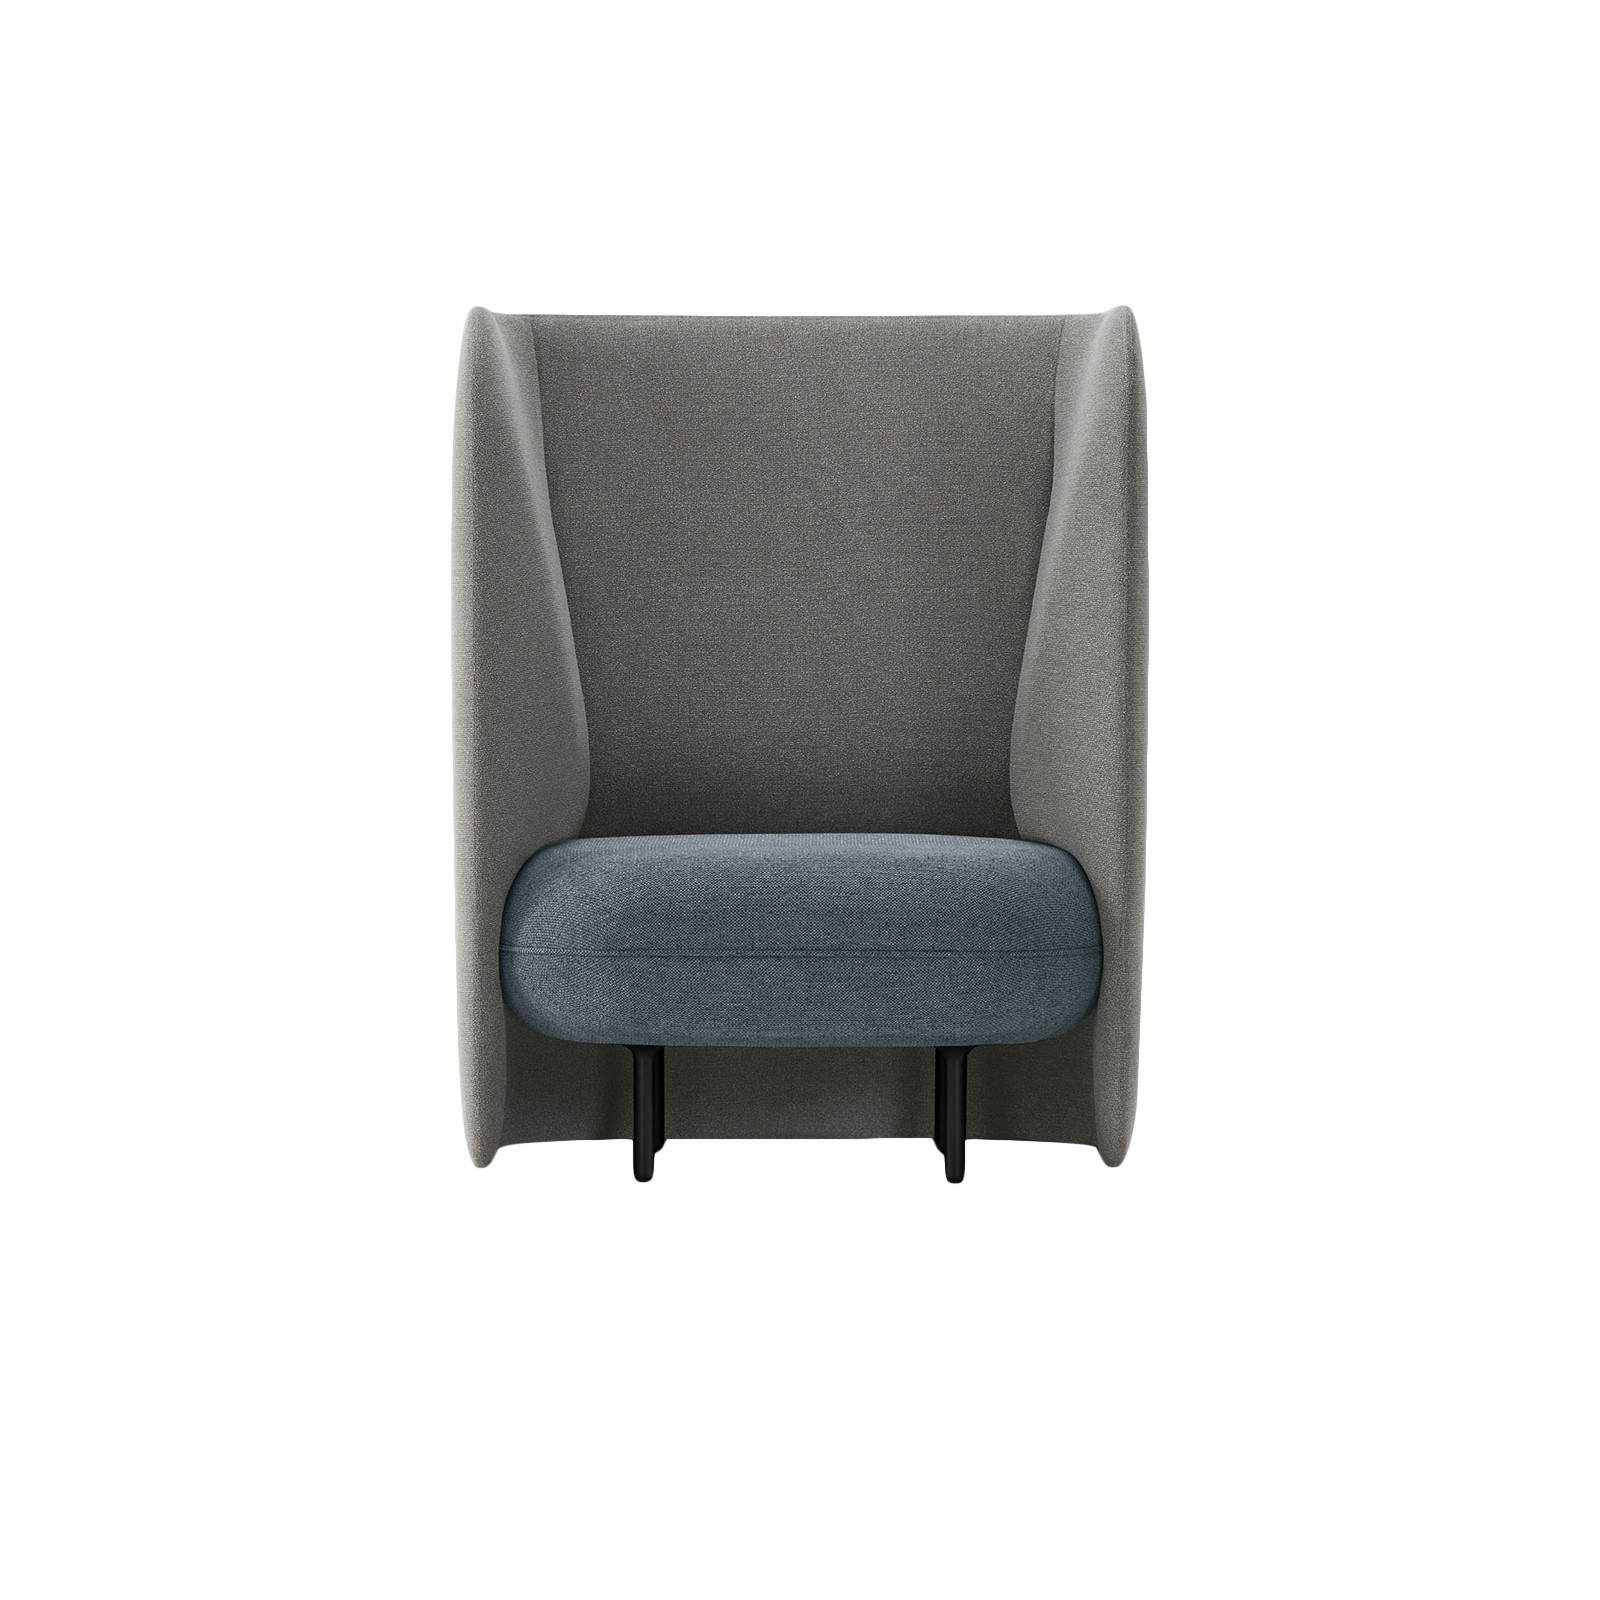 CHAPELLE LOUNGE CHAIR